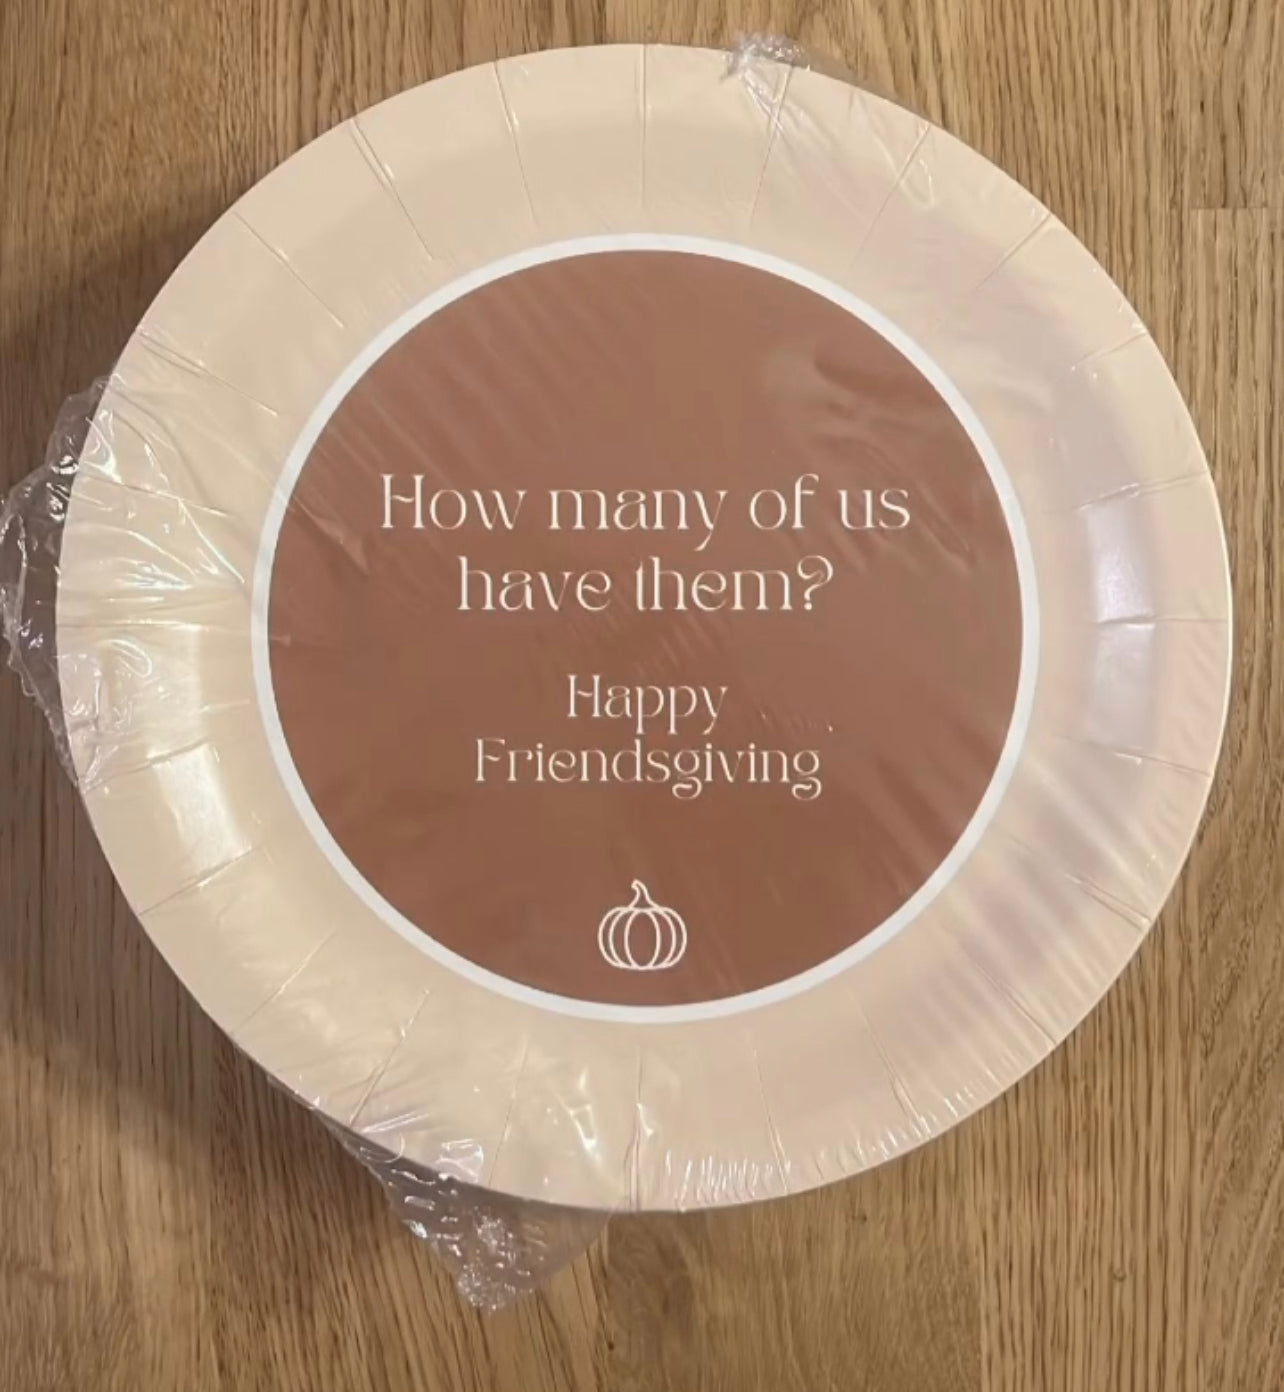 How many of us have them? Friendsgiving Plates